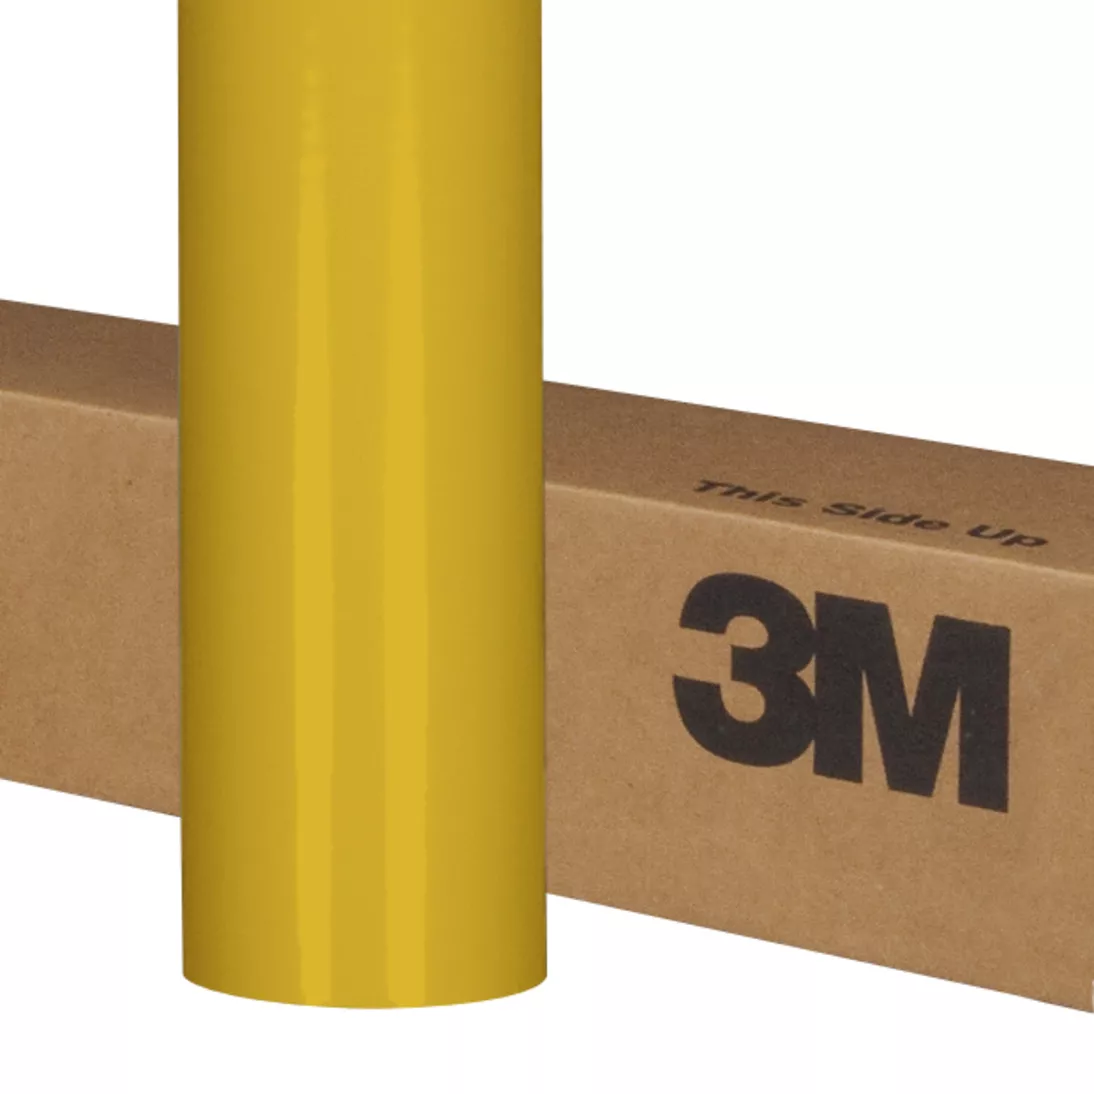 3M™ Scotchcal™ ElectroCut™ Graphic Film 7125-105, Harvest Gold, 24 in x
50 yd